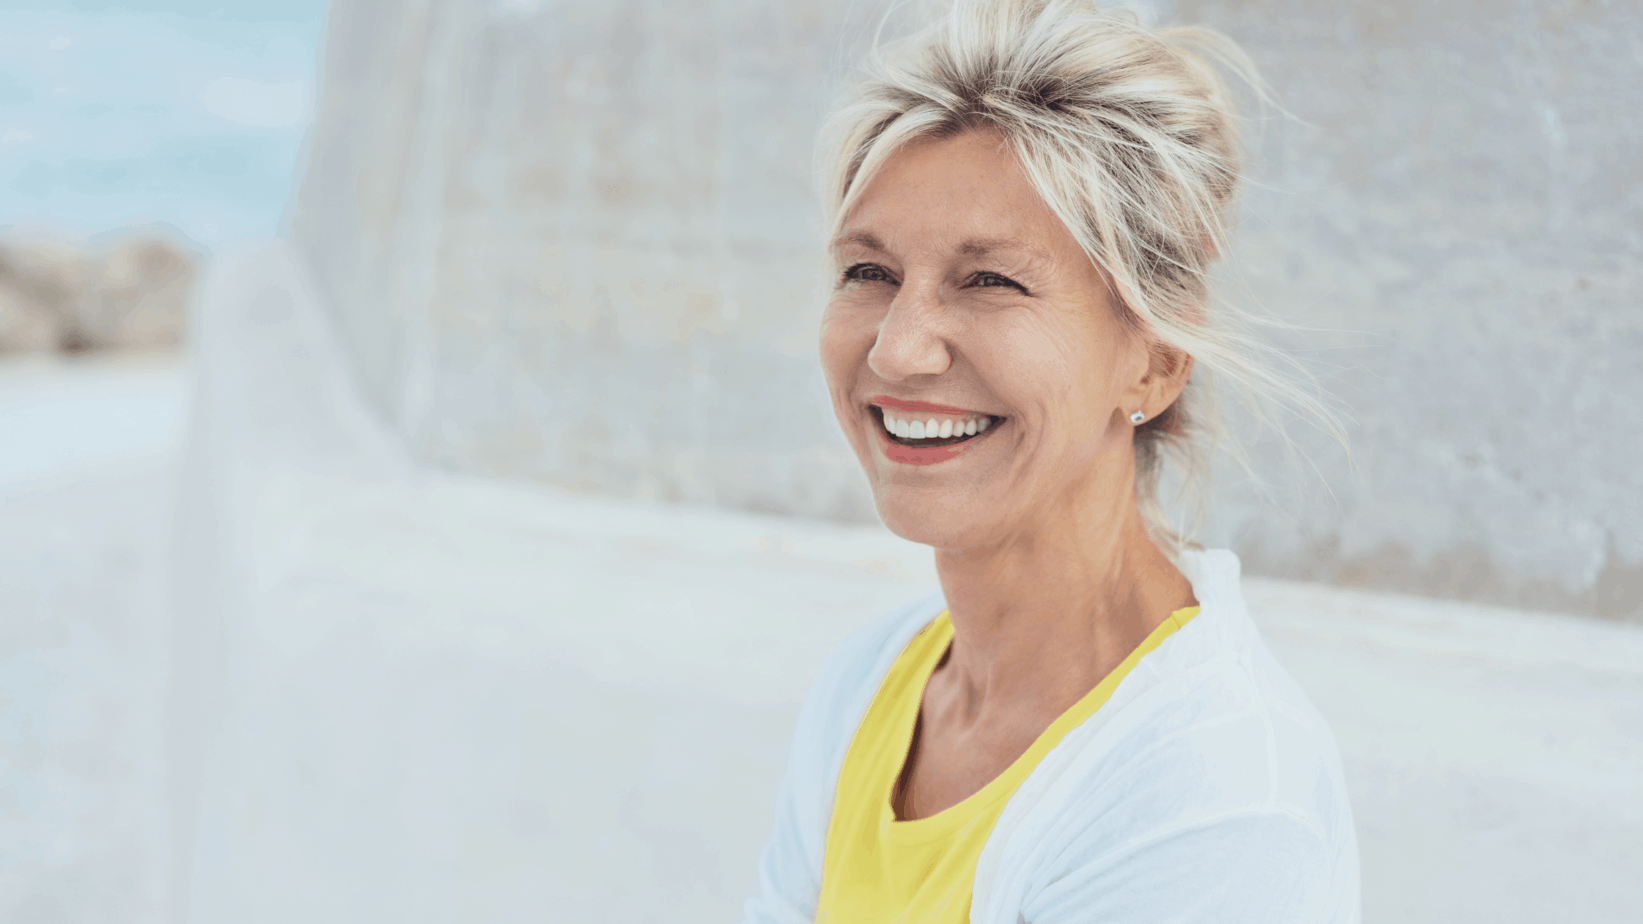 5 tips to healthy living in your 50's